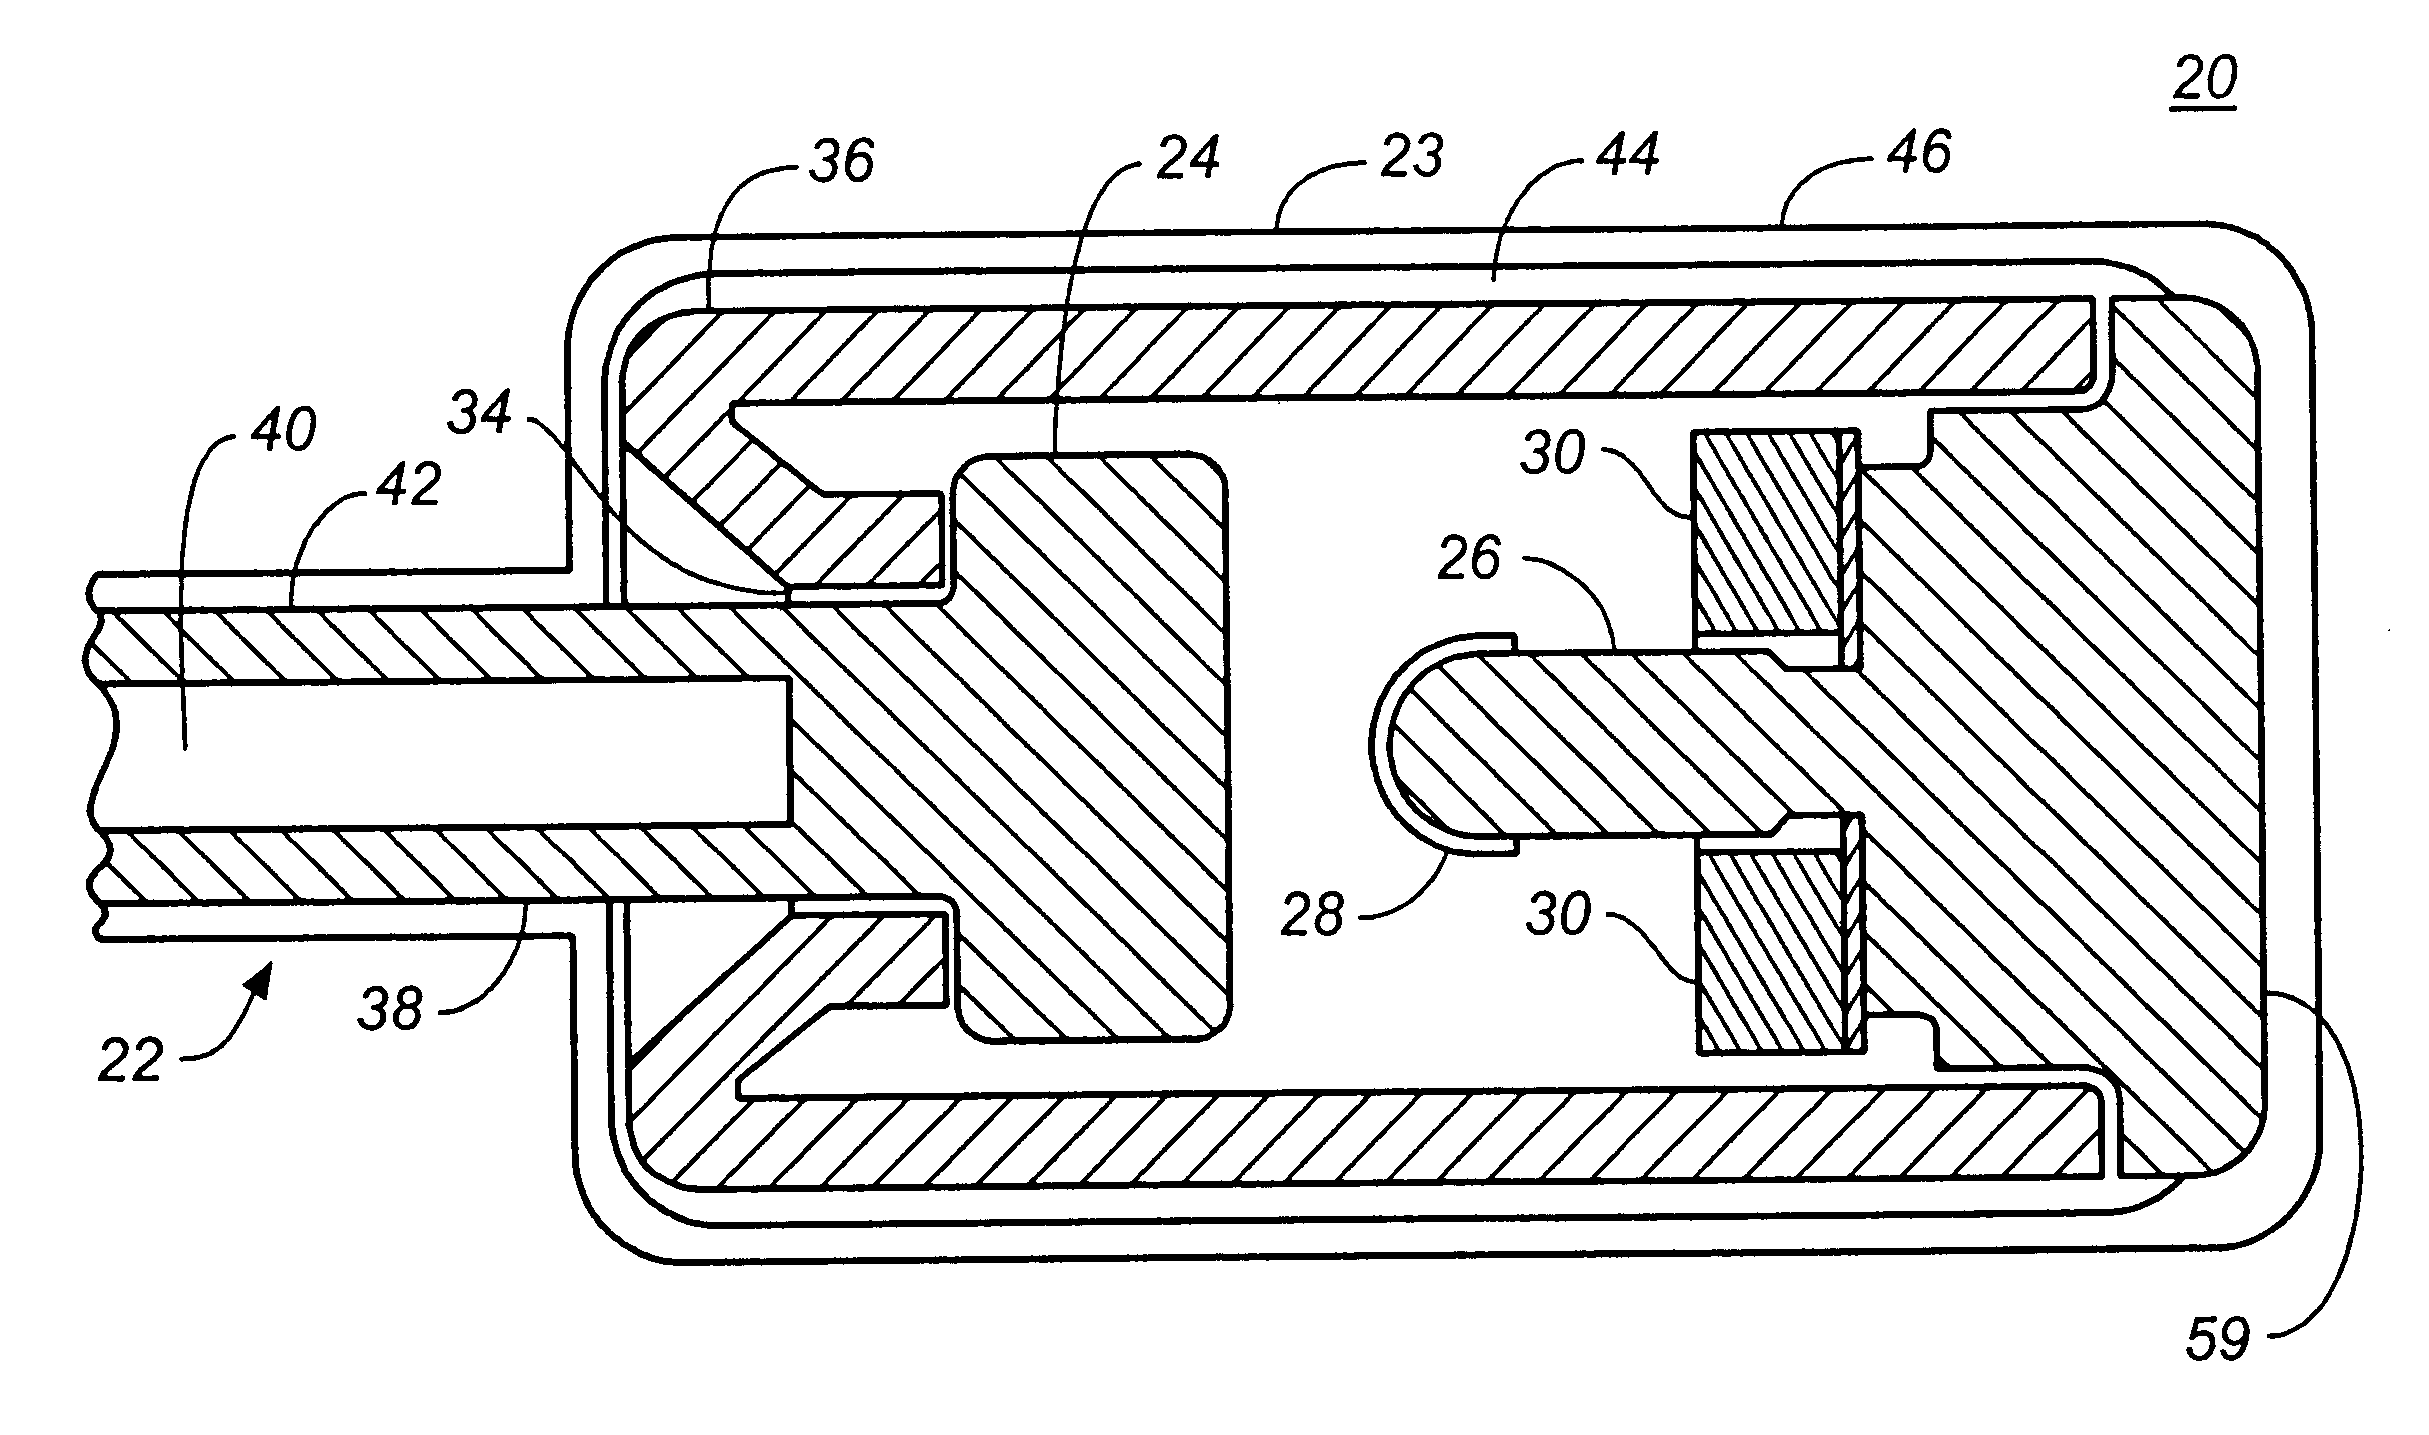 Device for delivering localized x-ray radiation and method of manufacture